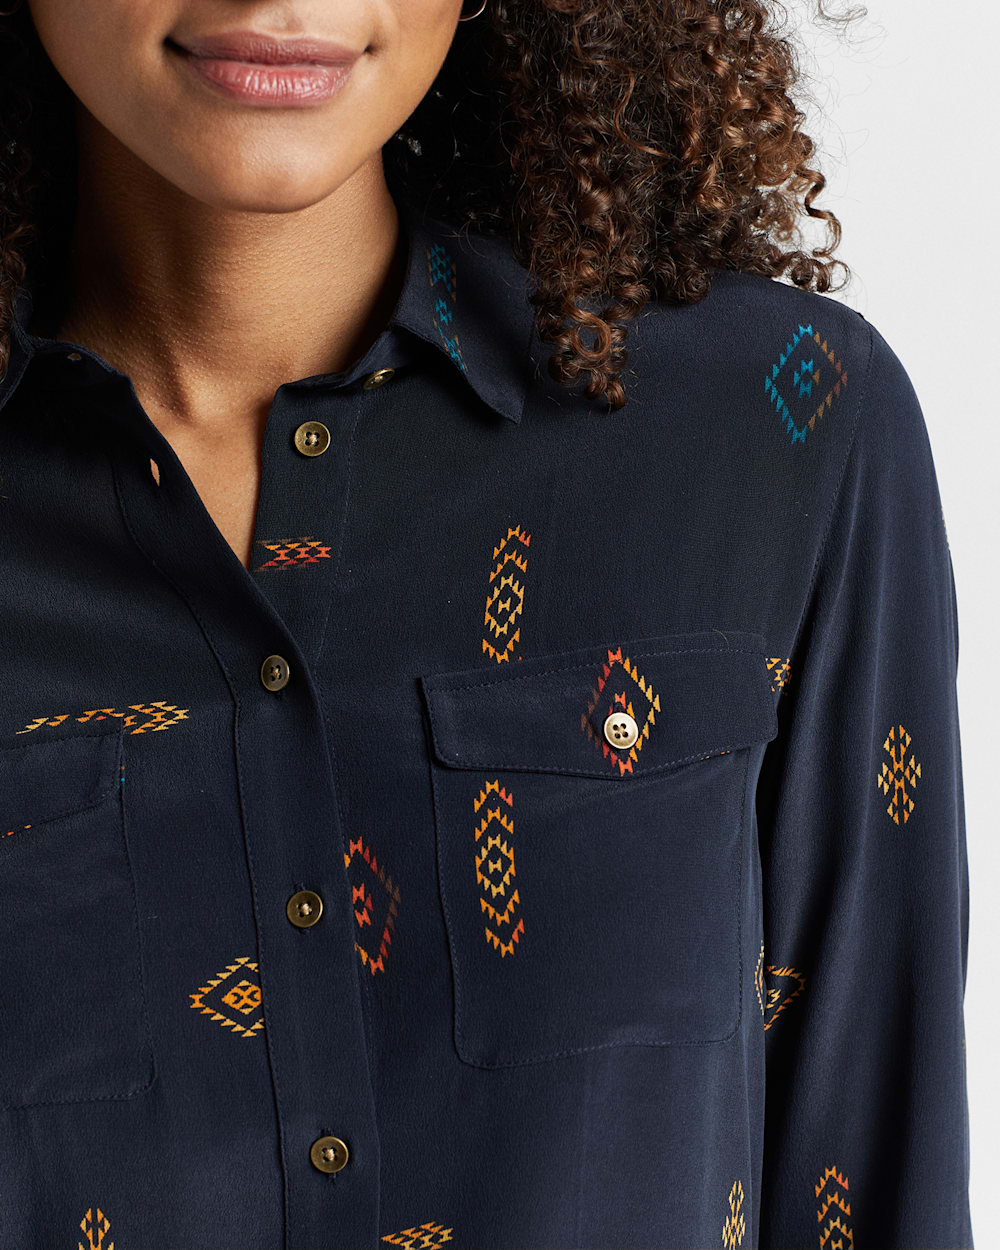 ALTERNATE VIEW OF WOMEN'S WASHABLE TWO POCKET SILK SHIRT IN MIDNIGHT NAVY MULTI image number 4